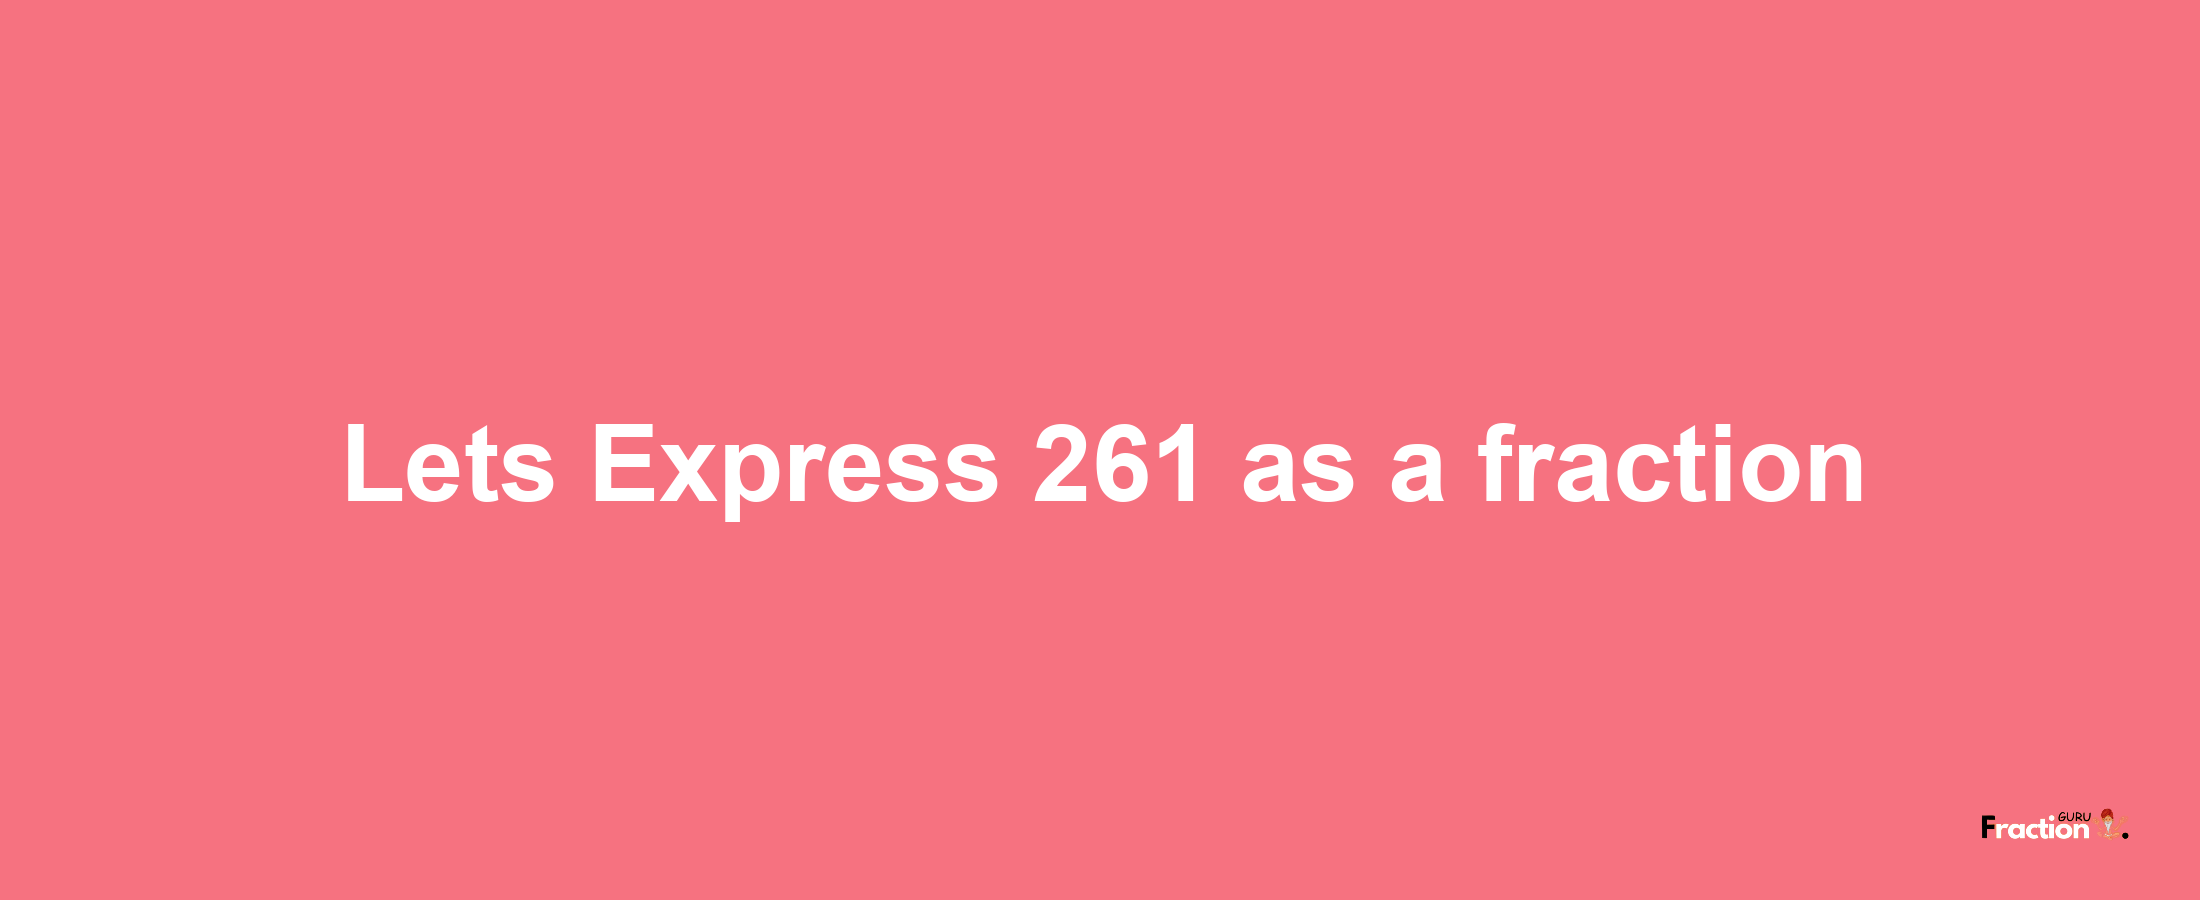 Lets Express 261 as afraction